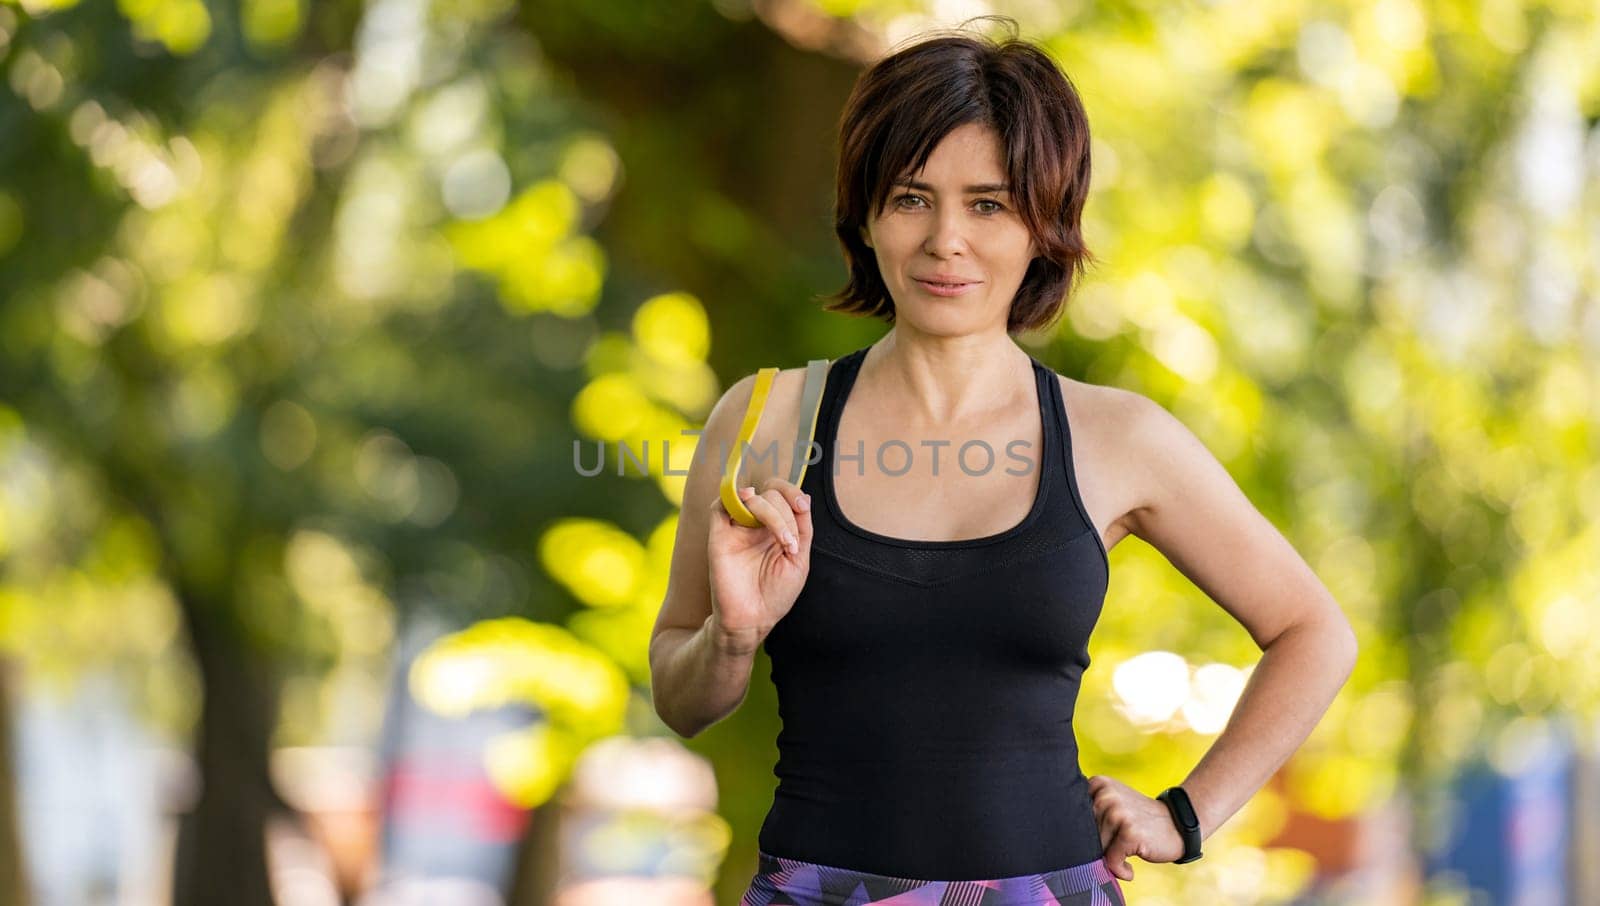 Girl with rubber elastic band looking at camera after workout outdoors in park. Young woman exercising at morning with additional equipment portrait